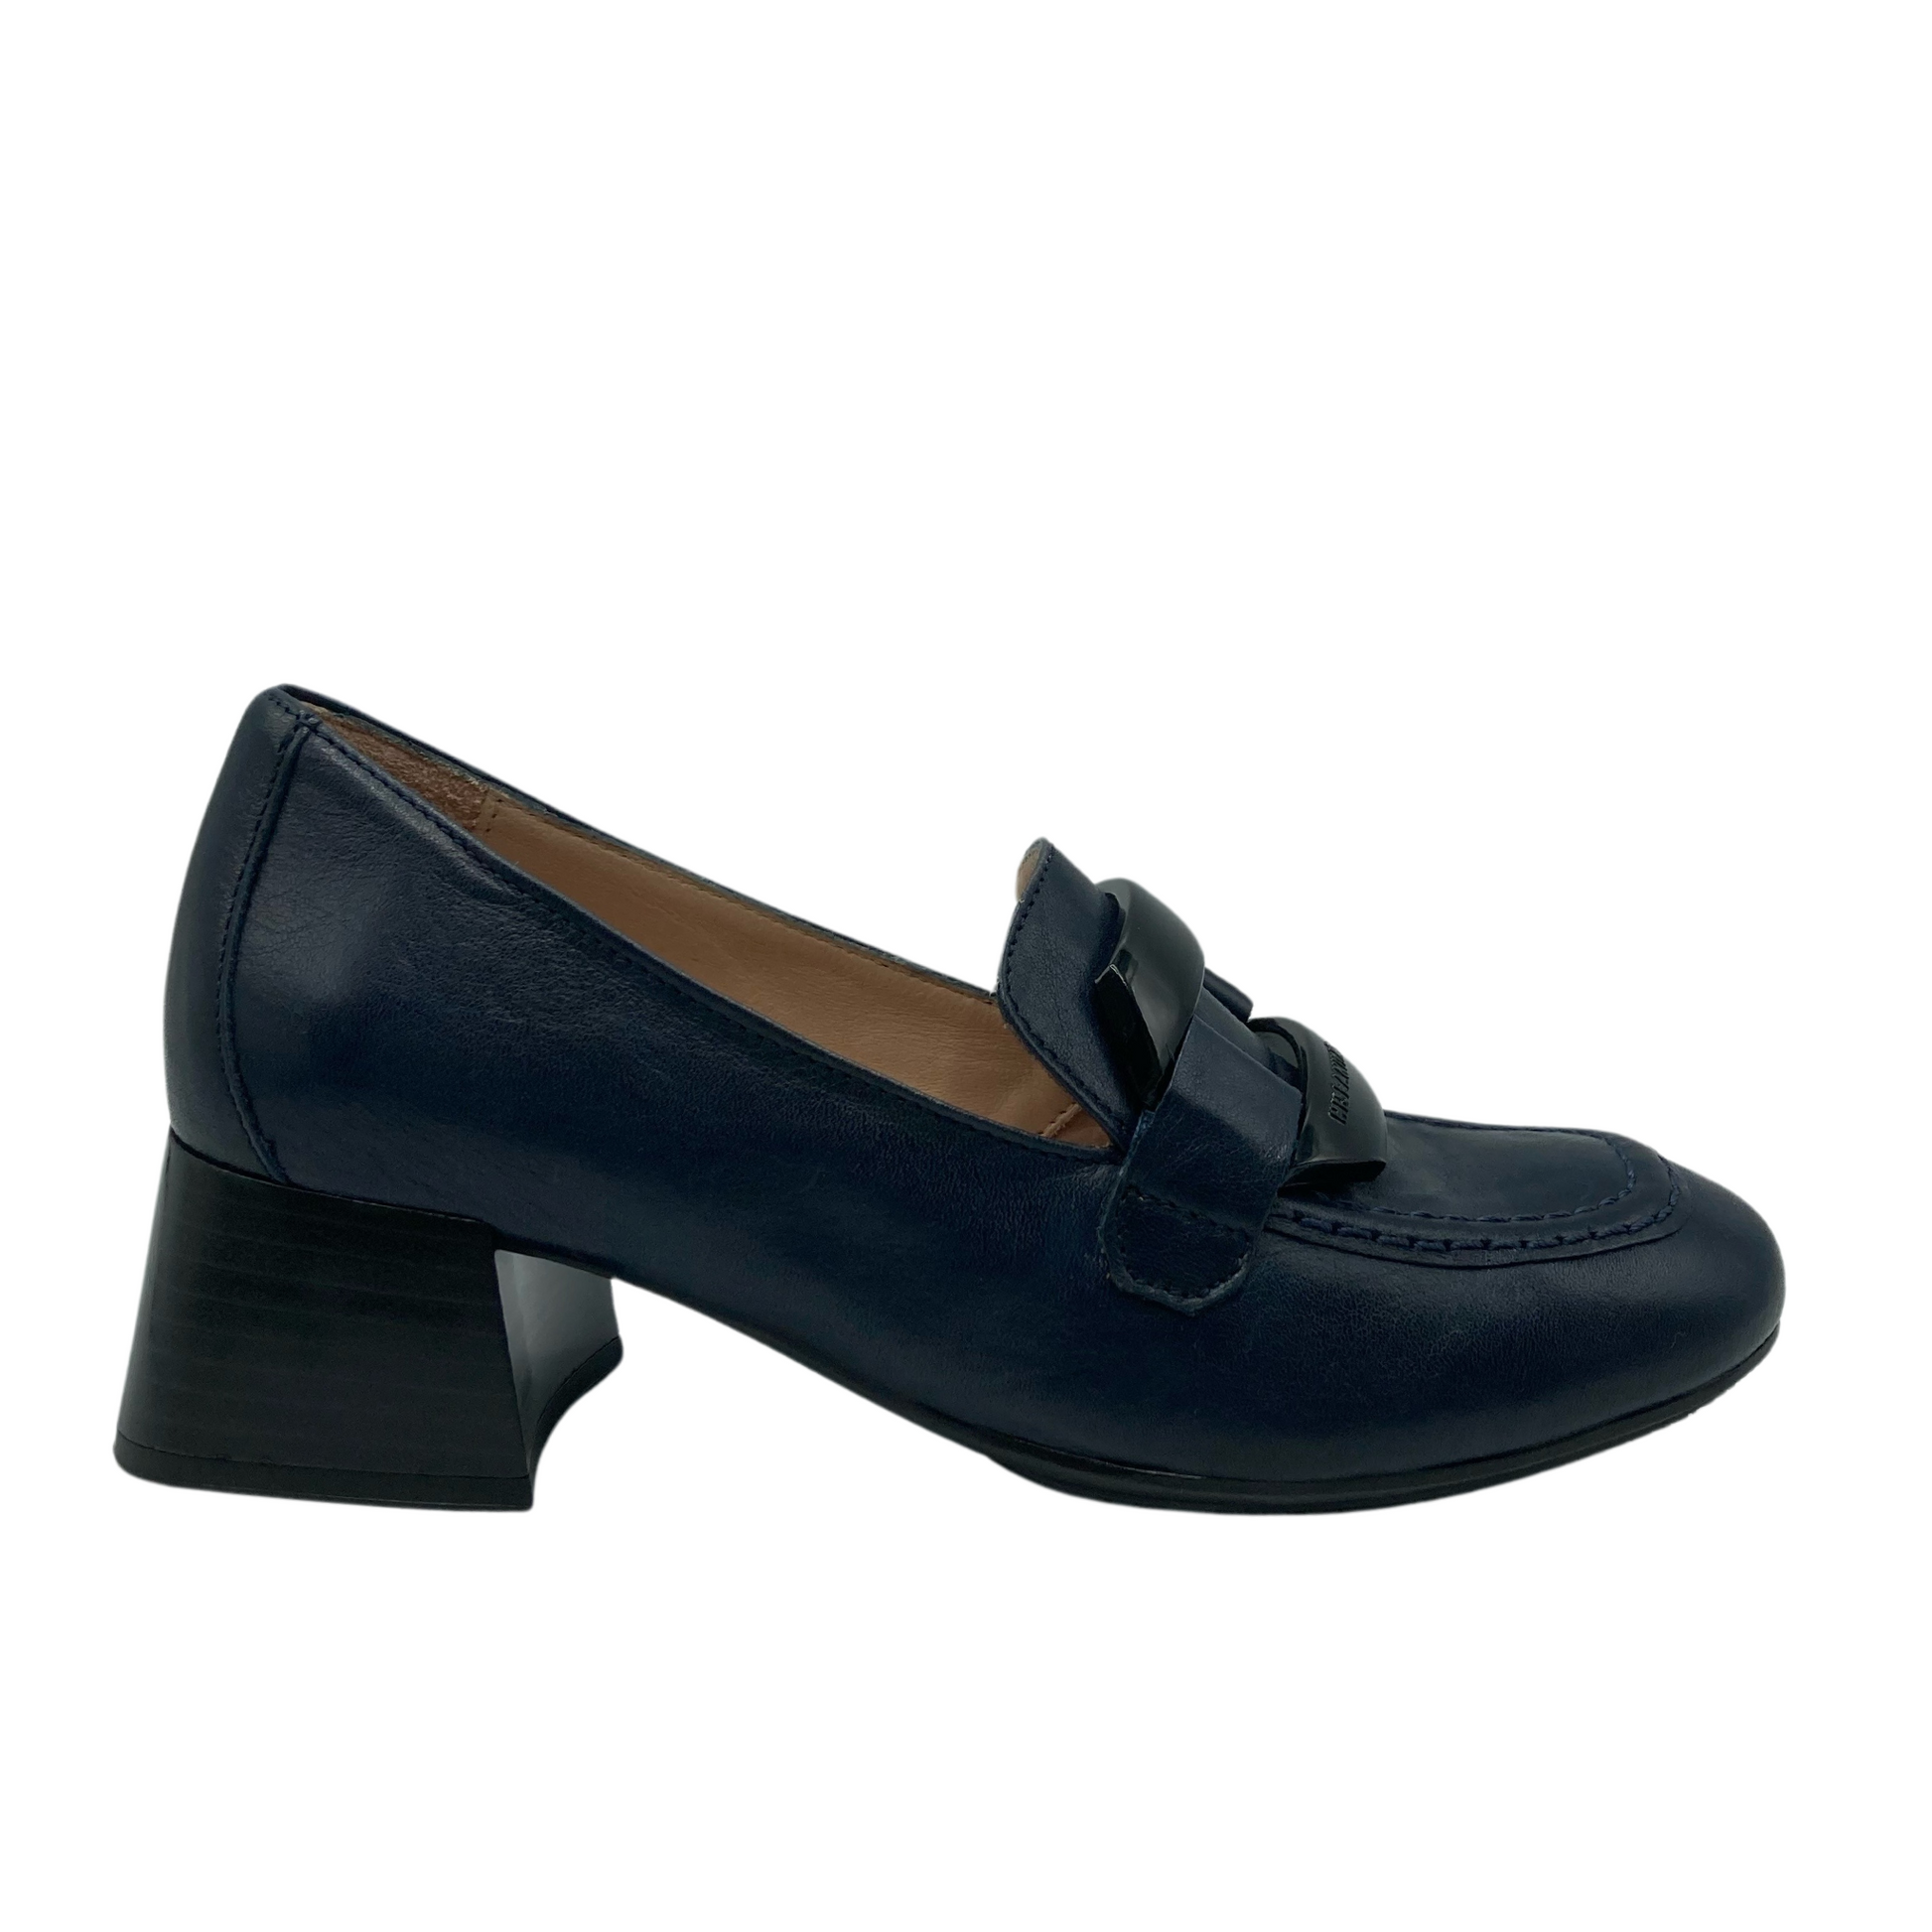 Right facing view of navy leather loafer with block heel and leather lining